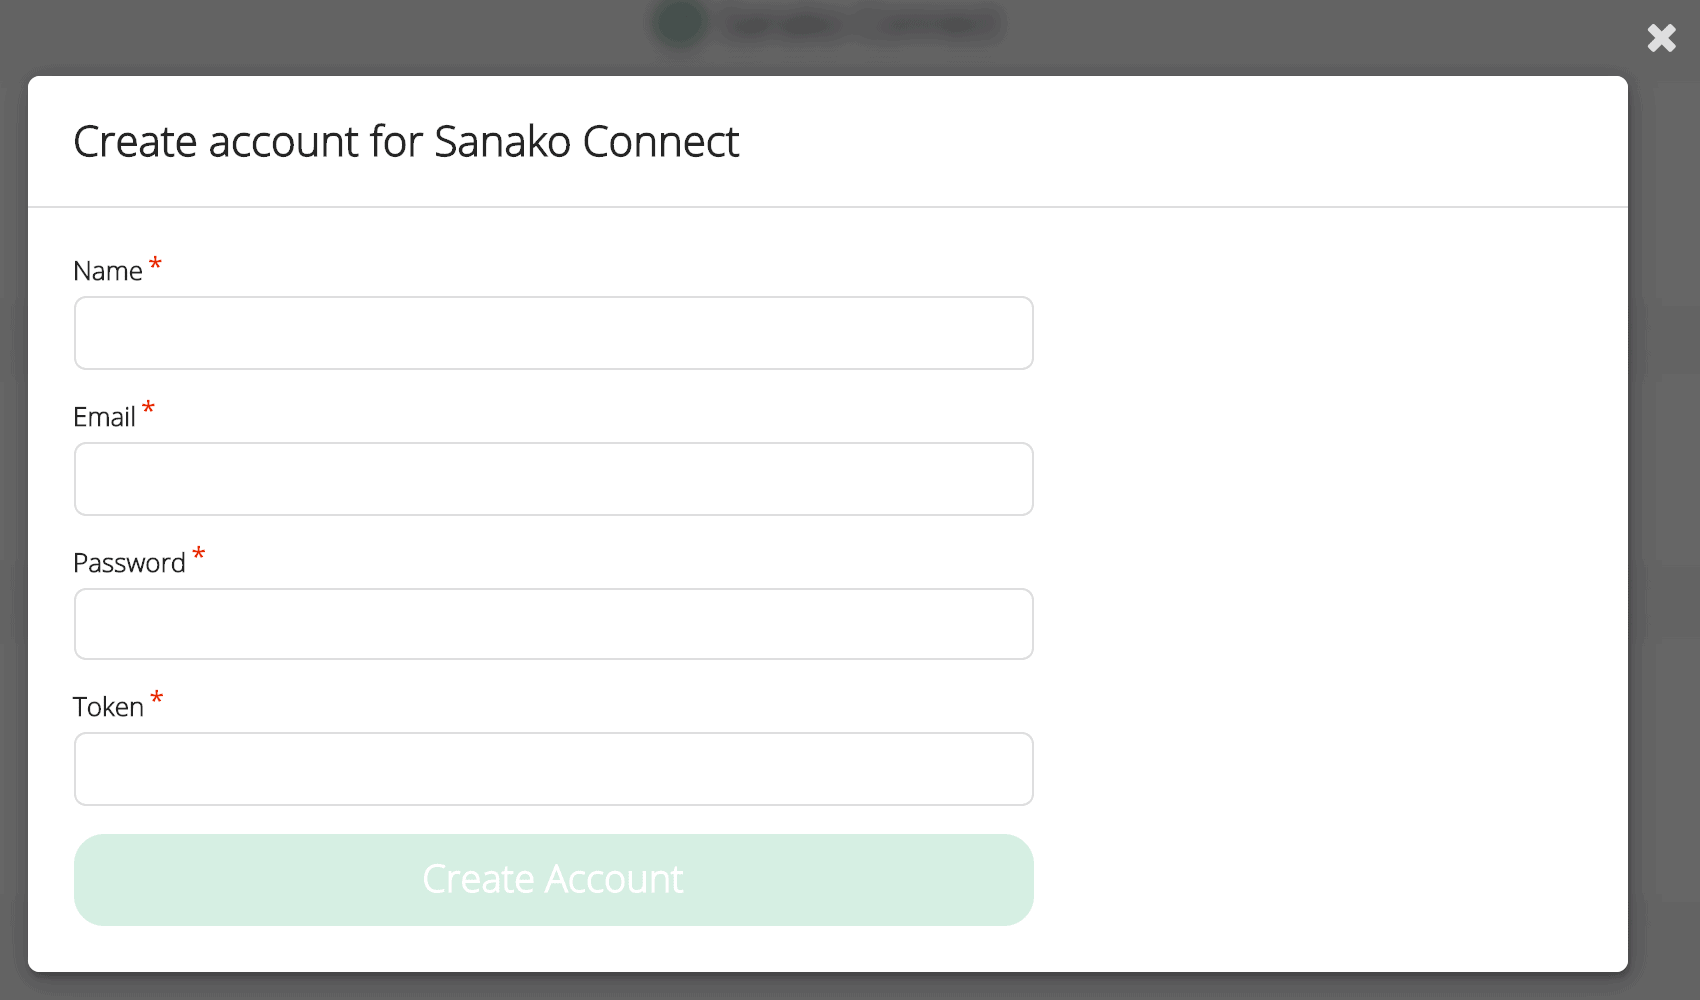 Picture showing the pop-up window for account creation inside Sanako Connect